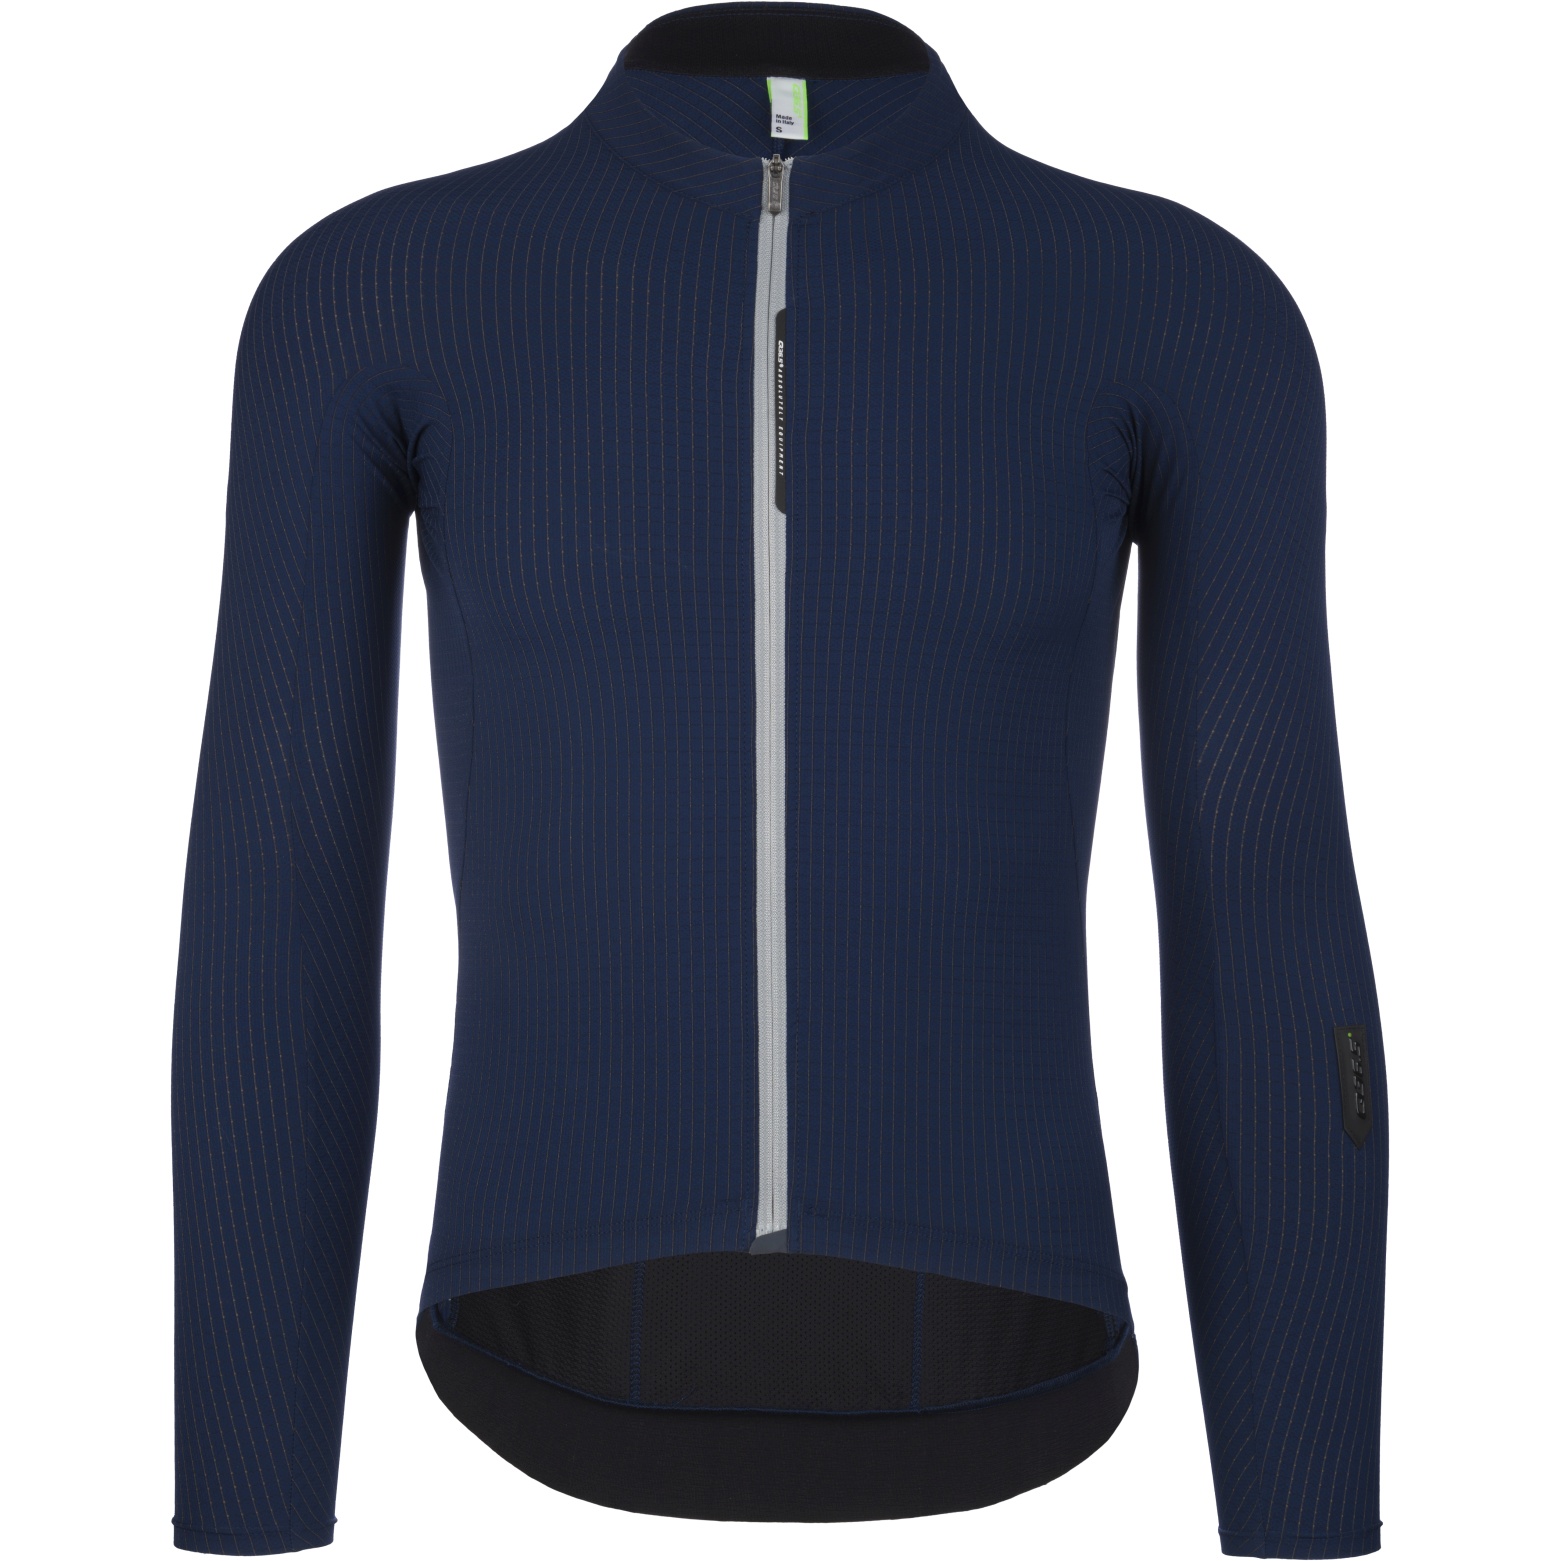 Picture of Q36.5 L1 Long Sleeve Jersey - pinstripe x navy